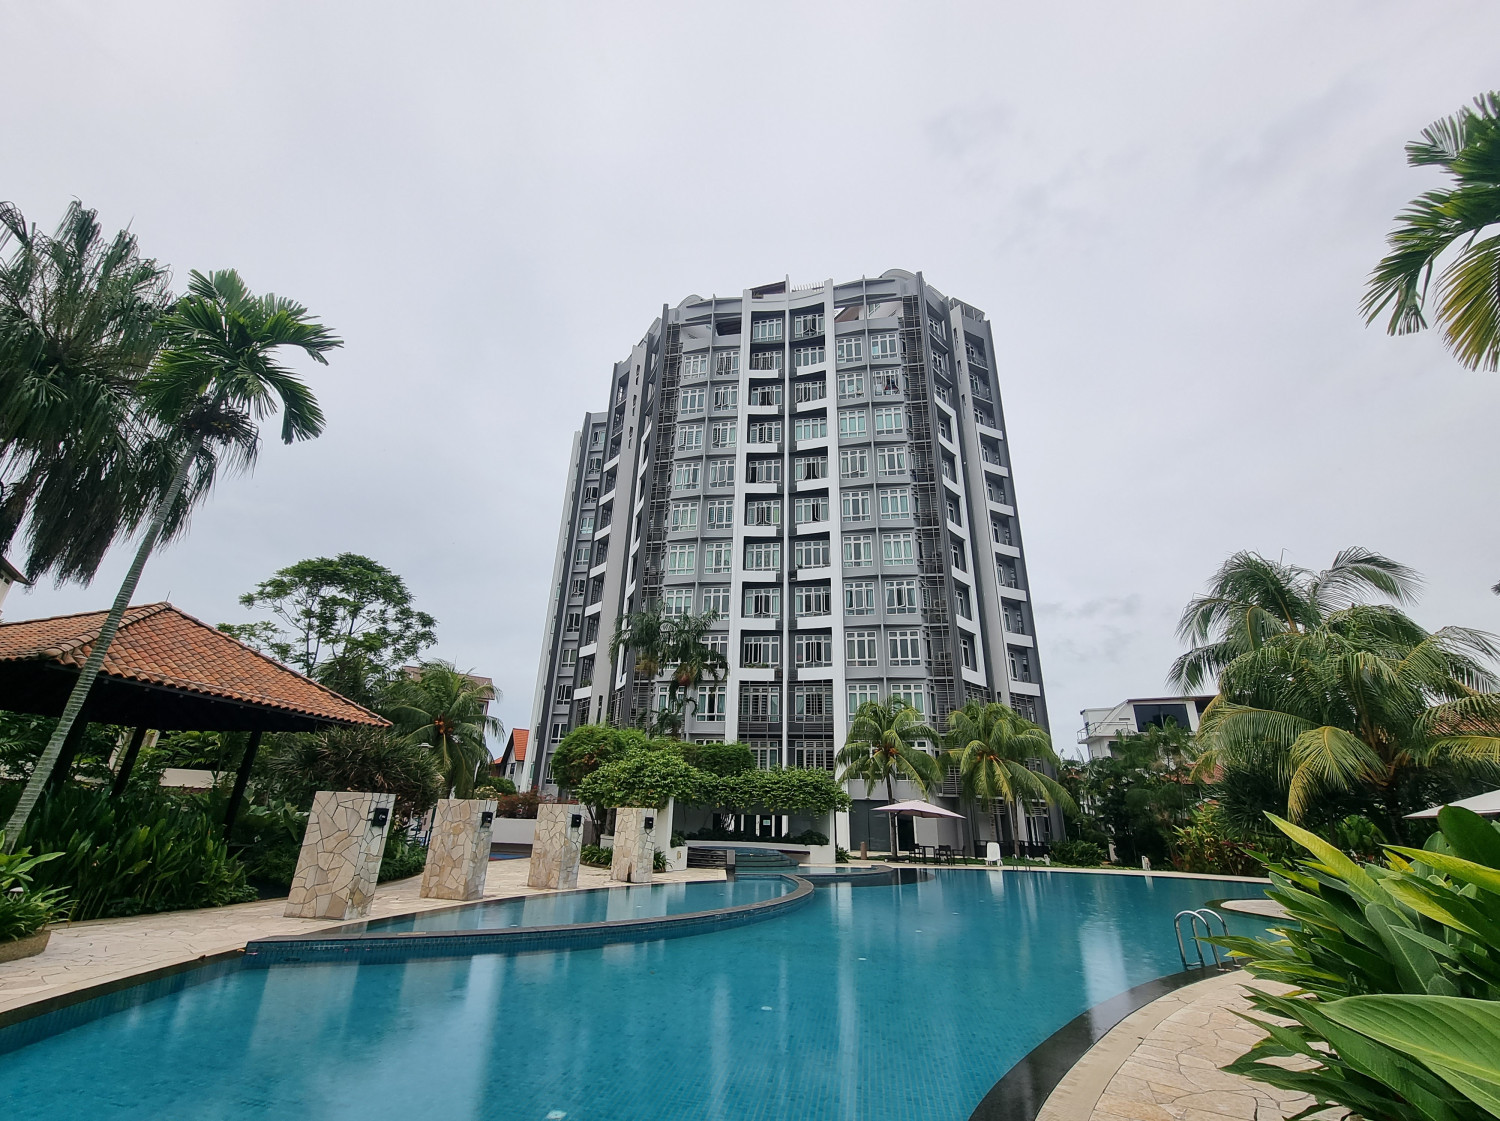 Three-bedroom unit at The Heliconia for sale at $1.72 mil - Property News